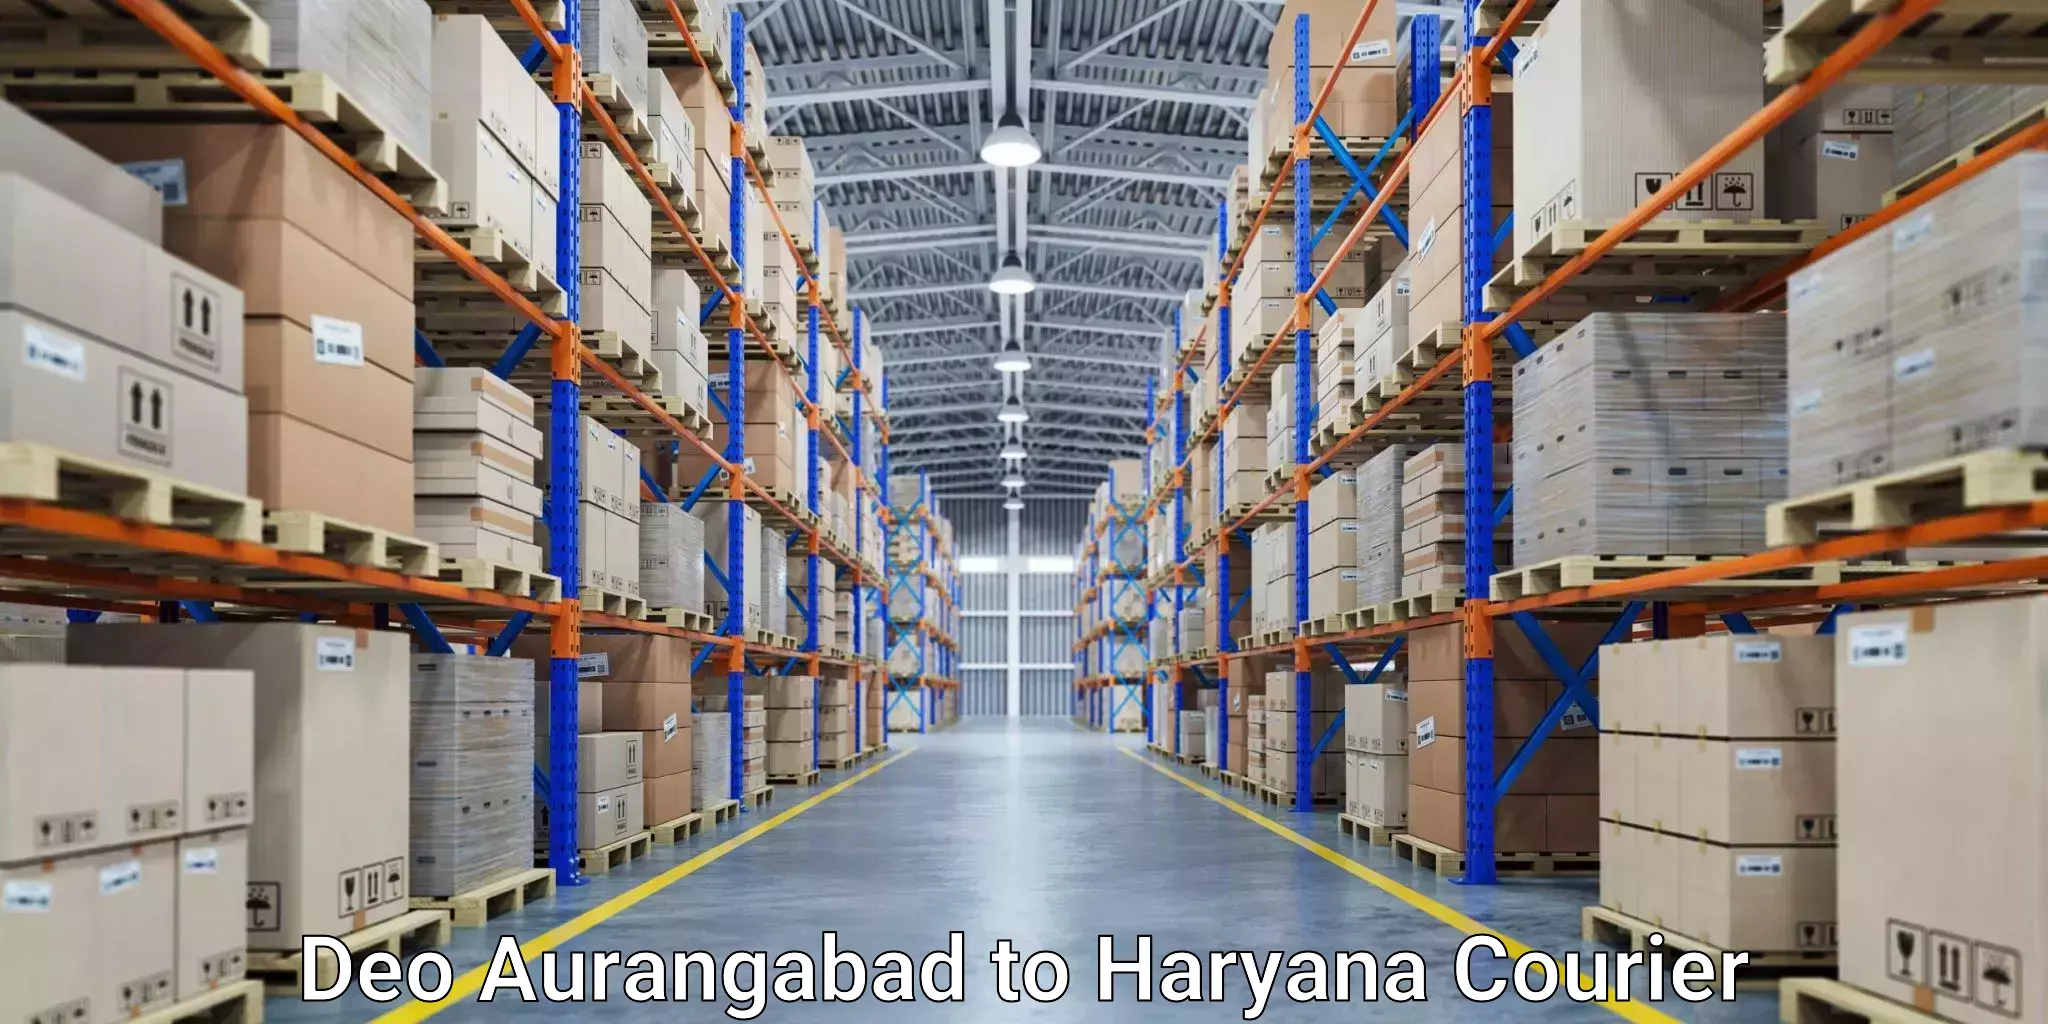 Automated parcel services Deo Aurangabad to Chaudhary Charan Singh Haryana Agricultural University Hisar